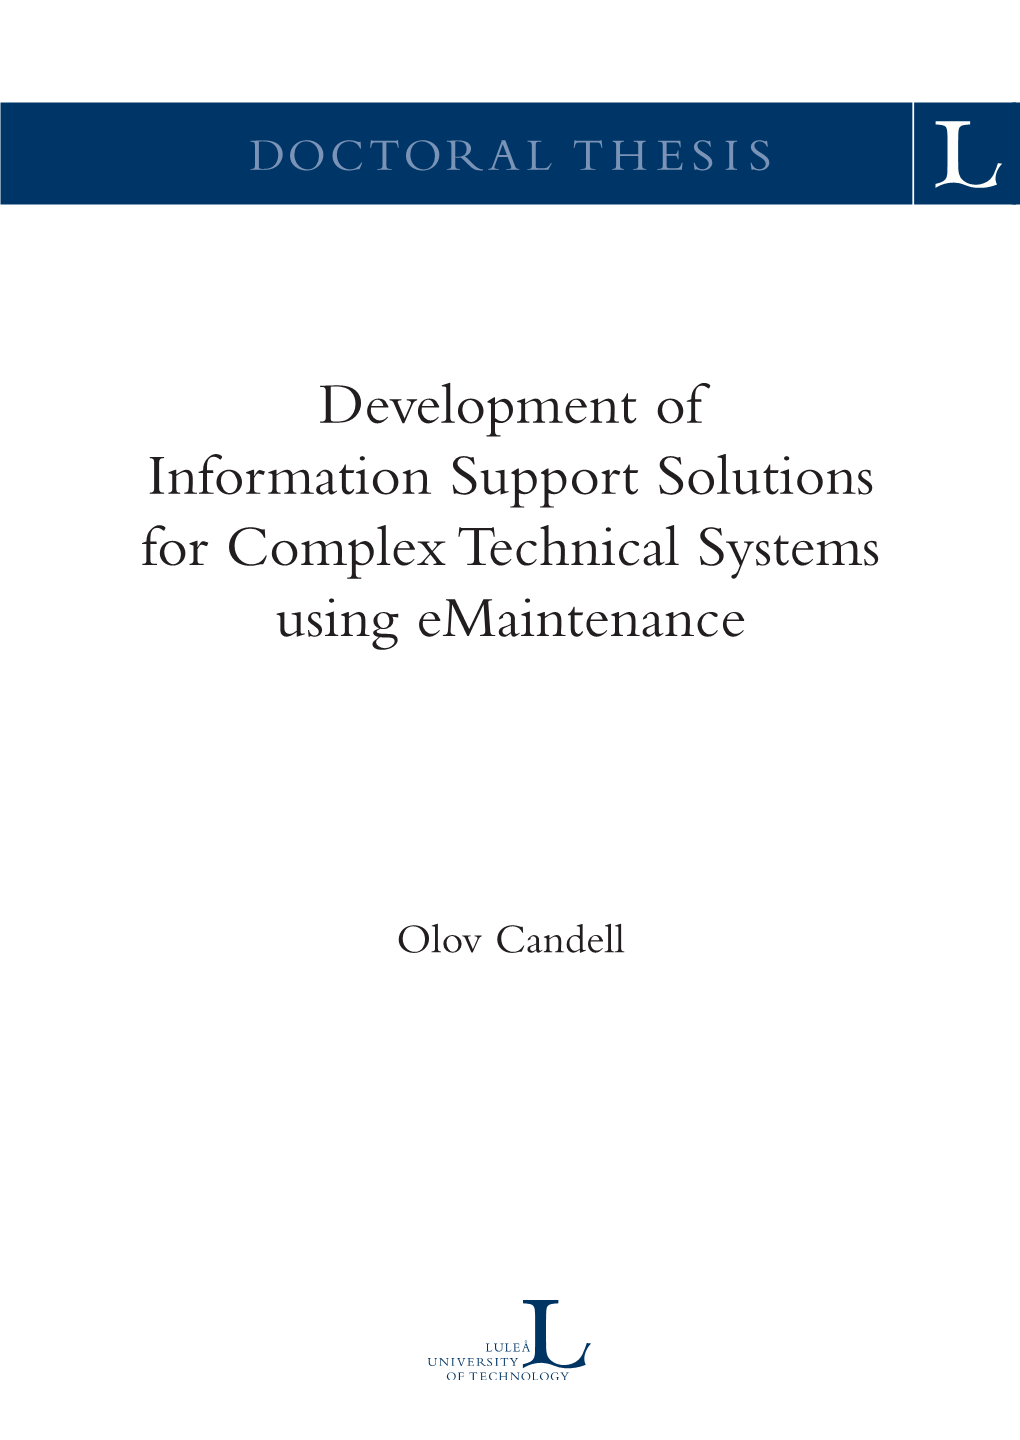 Development of Information Support Solutions for Complex Technical Systems Using Emaintenance